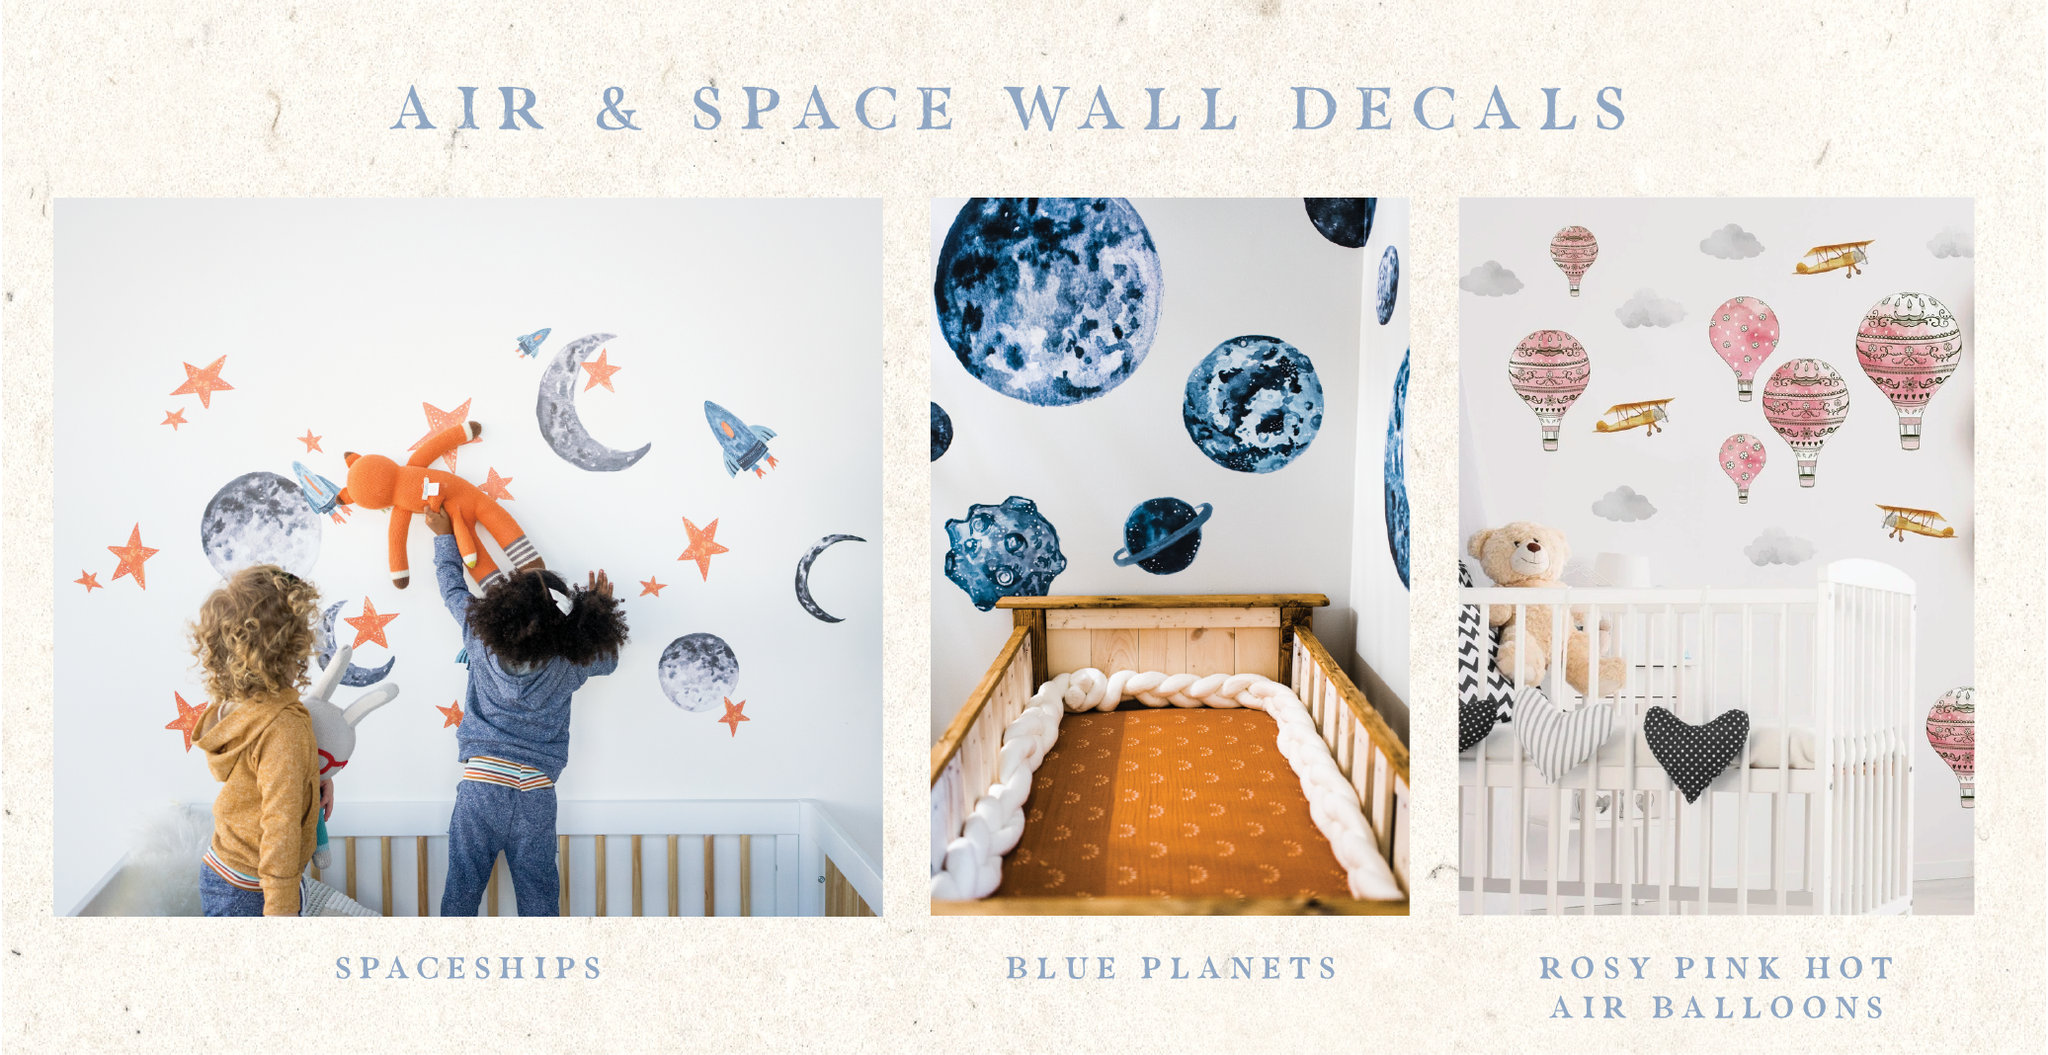 Air & Space Wall decals